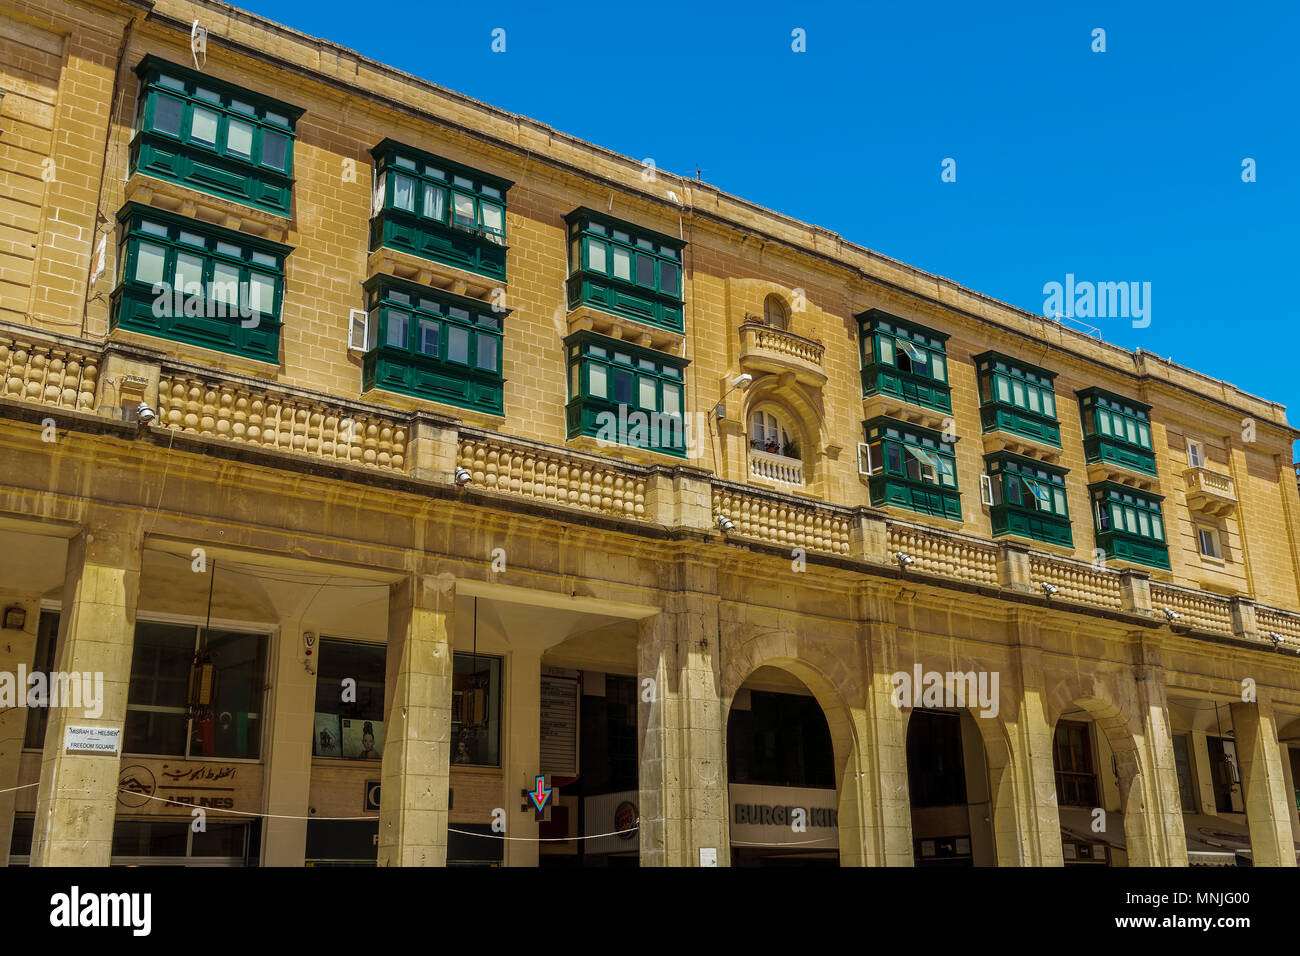 Valletta, Malta Freedom Square building. Day view of traditional Maltese limestone building with green balconies and shops at top of Republic Street. Stock Photo